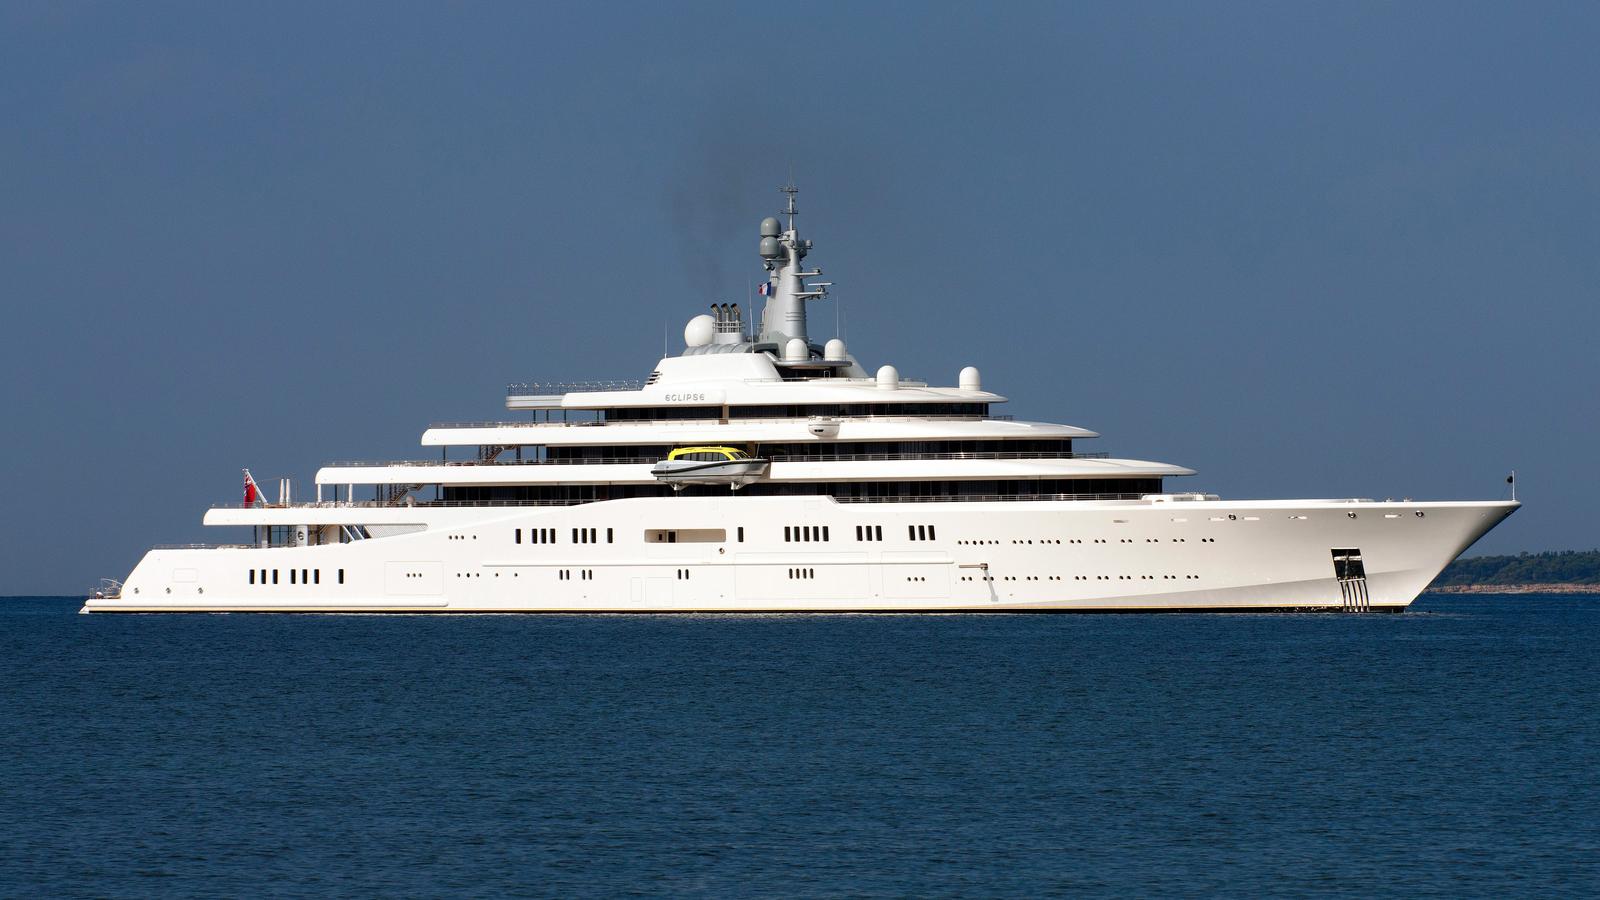 Roman Abramovich's Eclipse Holds Its Own as World's Most Expensive Superyacht - autoevolution